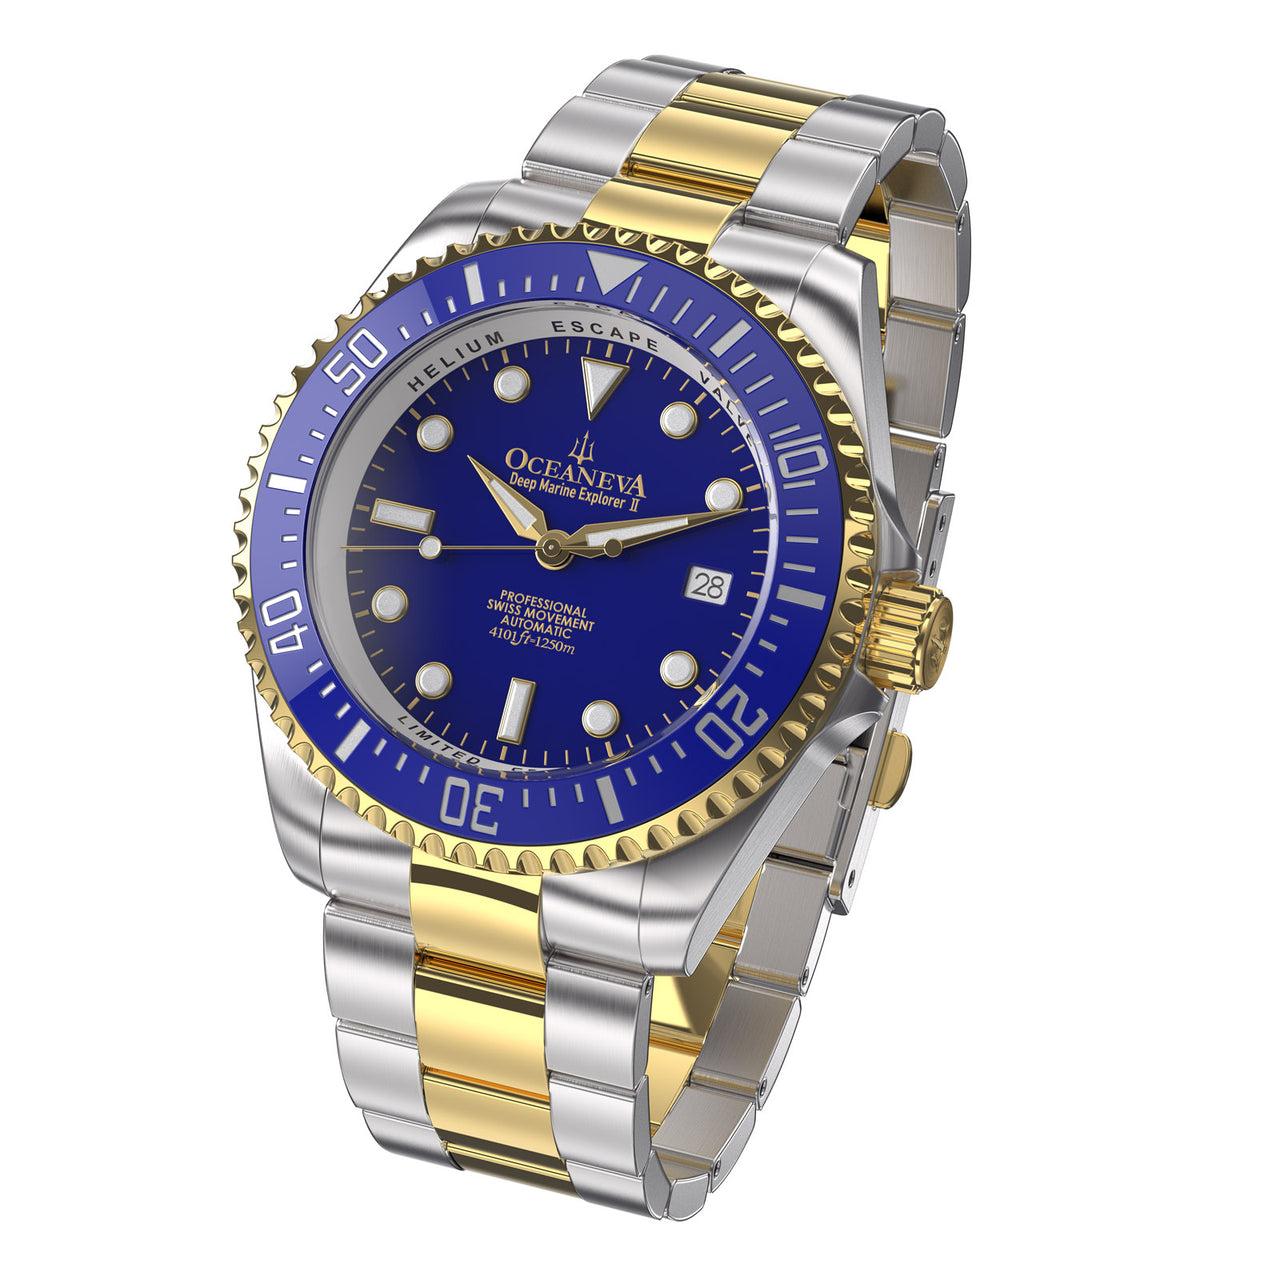 Oceaneva 1250M Dive Watch Blue and Gold Front Picture Slight Left Slant View